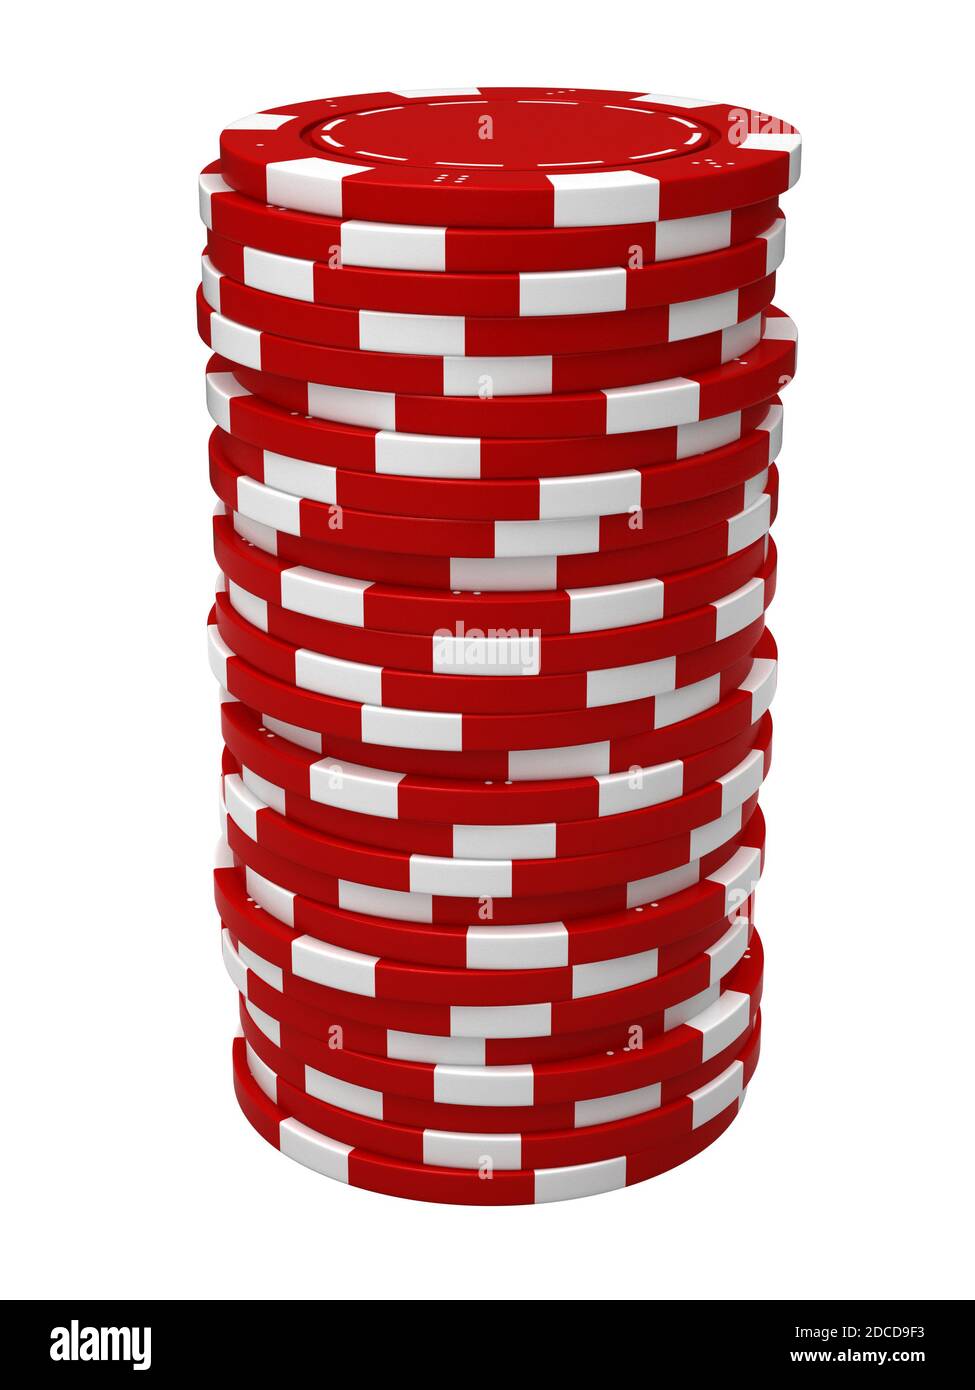 3d render of red casino chips pile isolated over white background Stock Photo